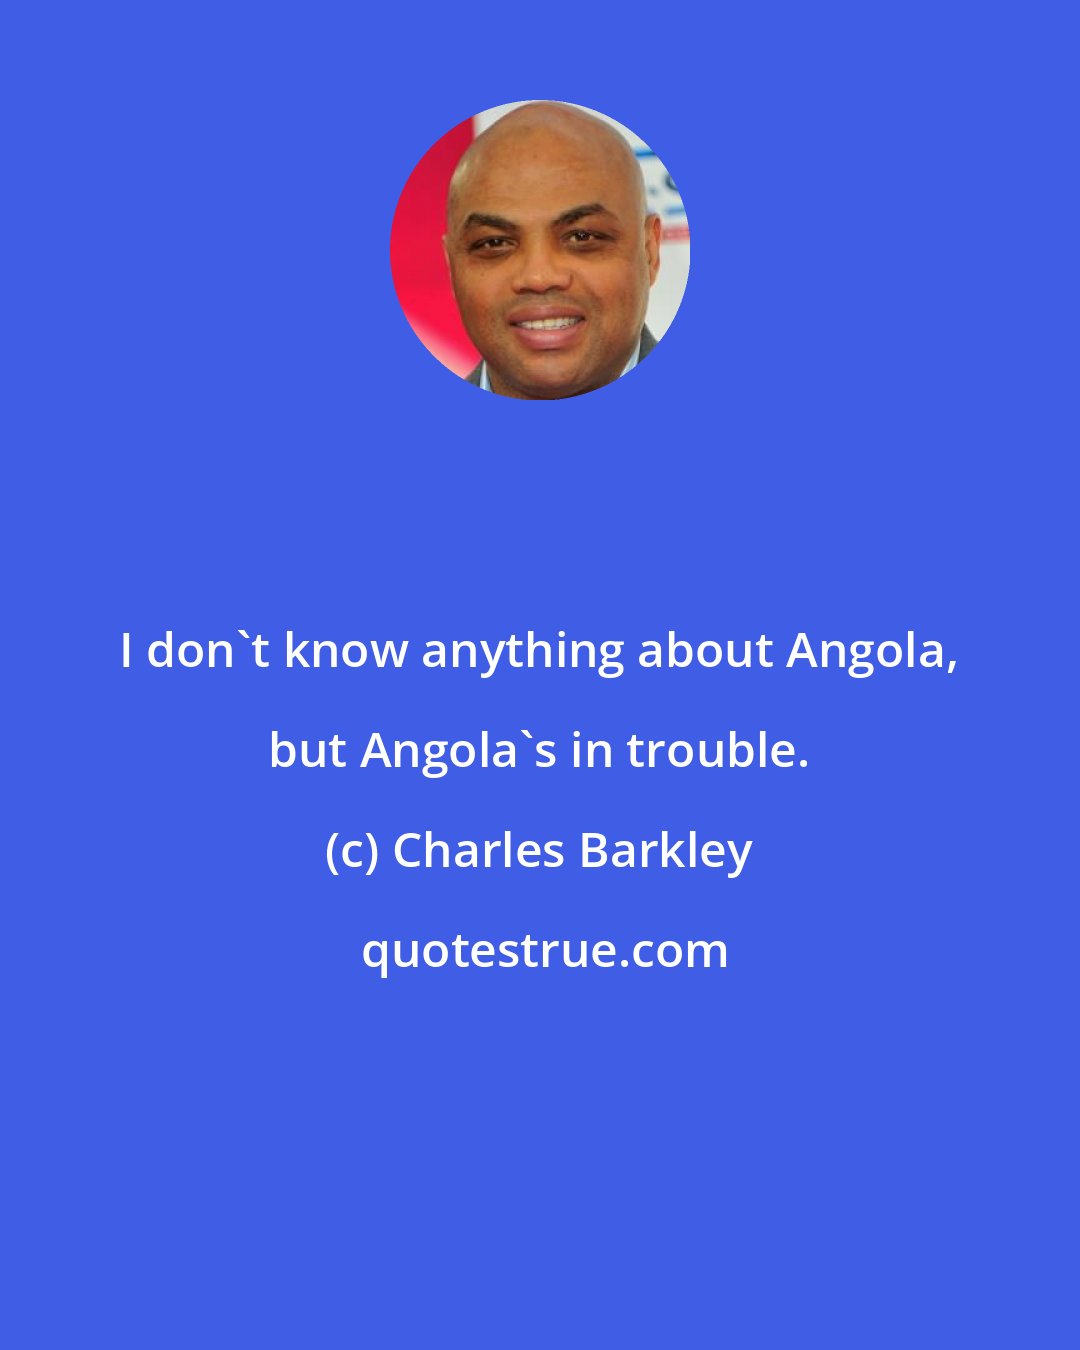 Charles Barkley: I don't know anything about Angola, but Angola's in trouble.